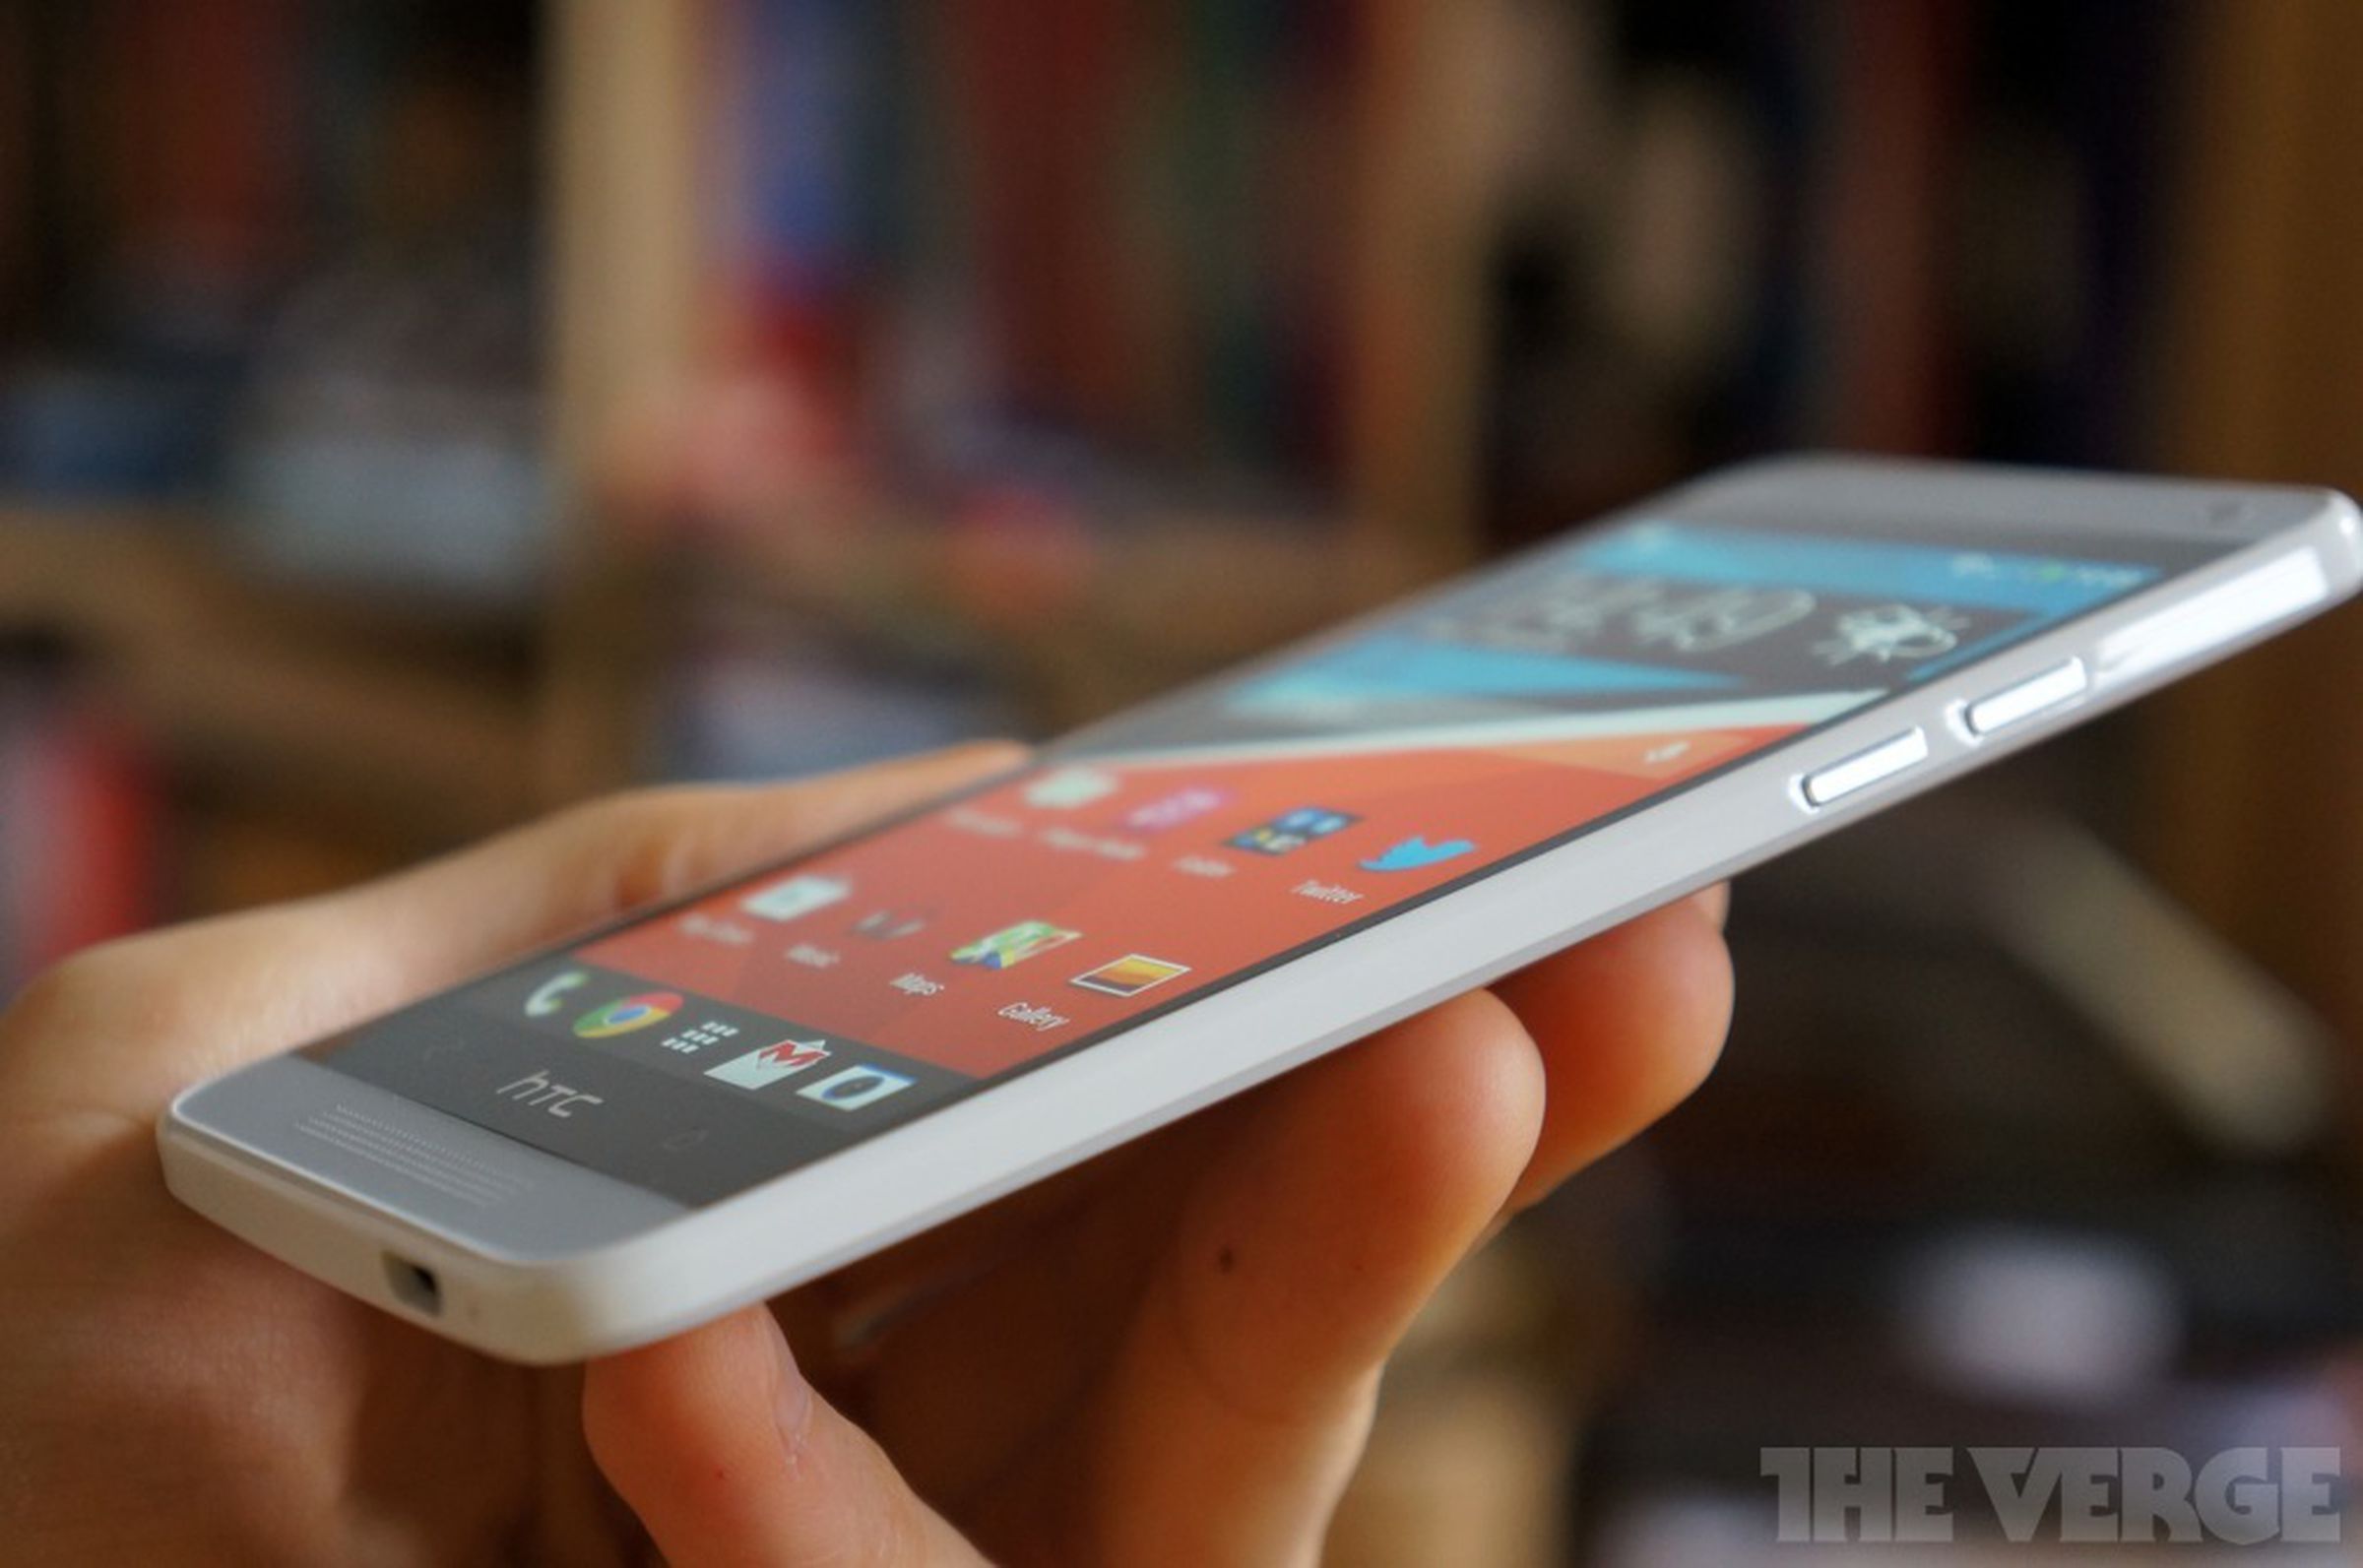 HTC One mini review gallery